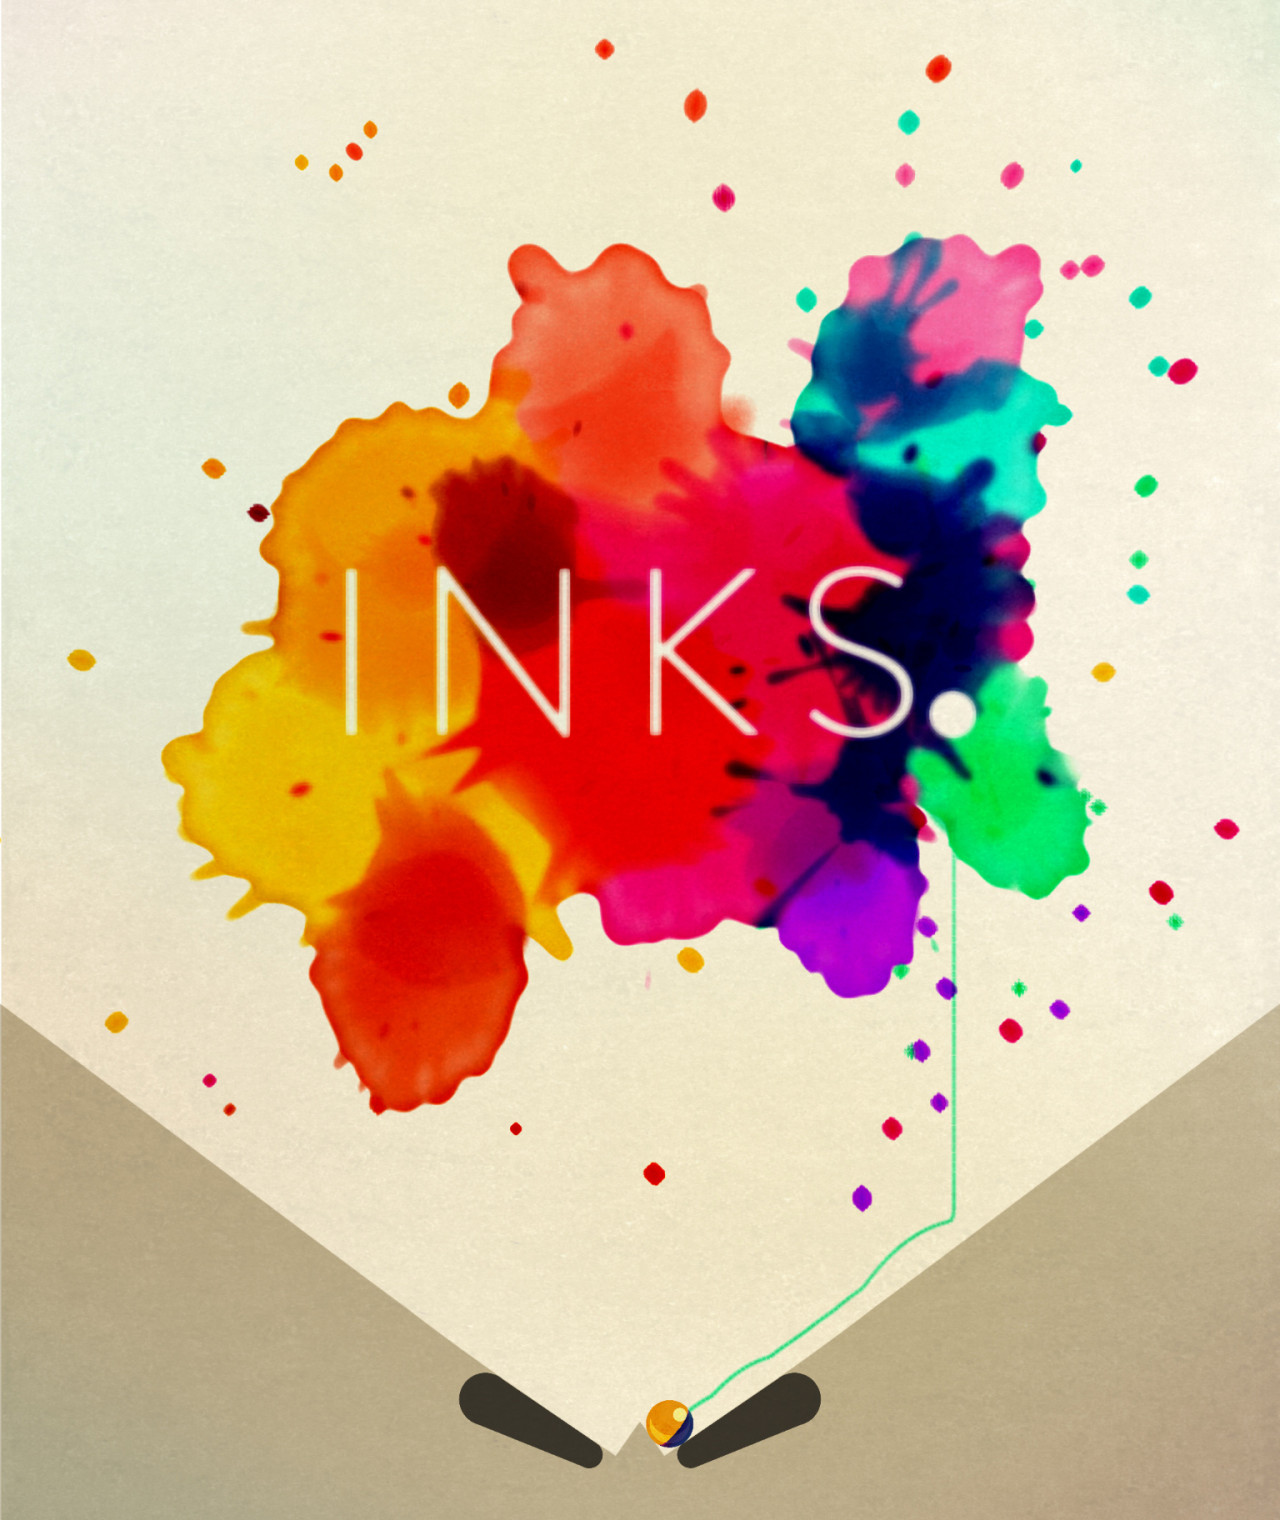 INKS: A Modernist Art App Disguised as a Pinball Puzzler